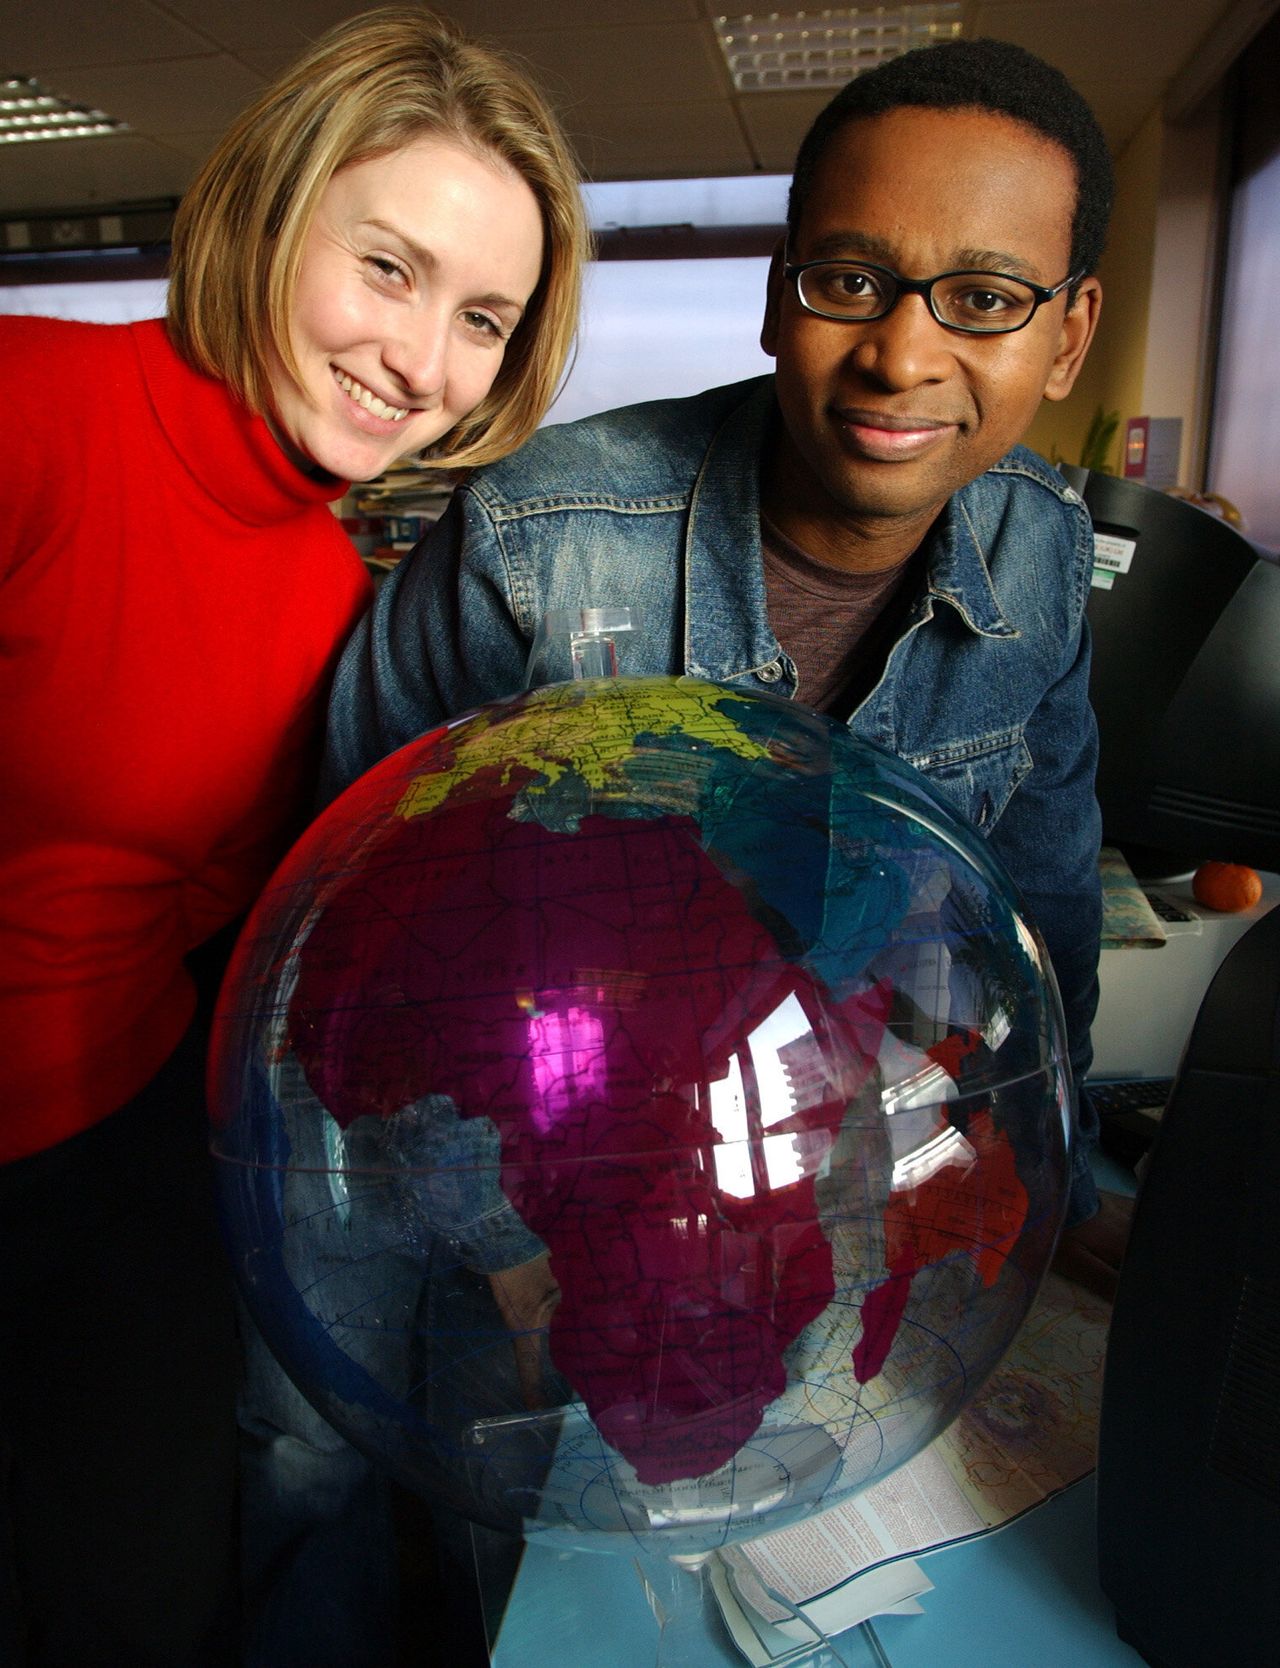 Newsround presenters Laura Jones and Lizo Mzimba pictured in 2003: teachers now using the show in their classrooms may have grown up watching the likes of these two on TV.